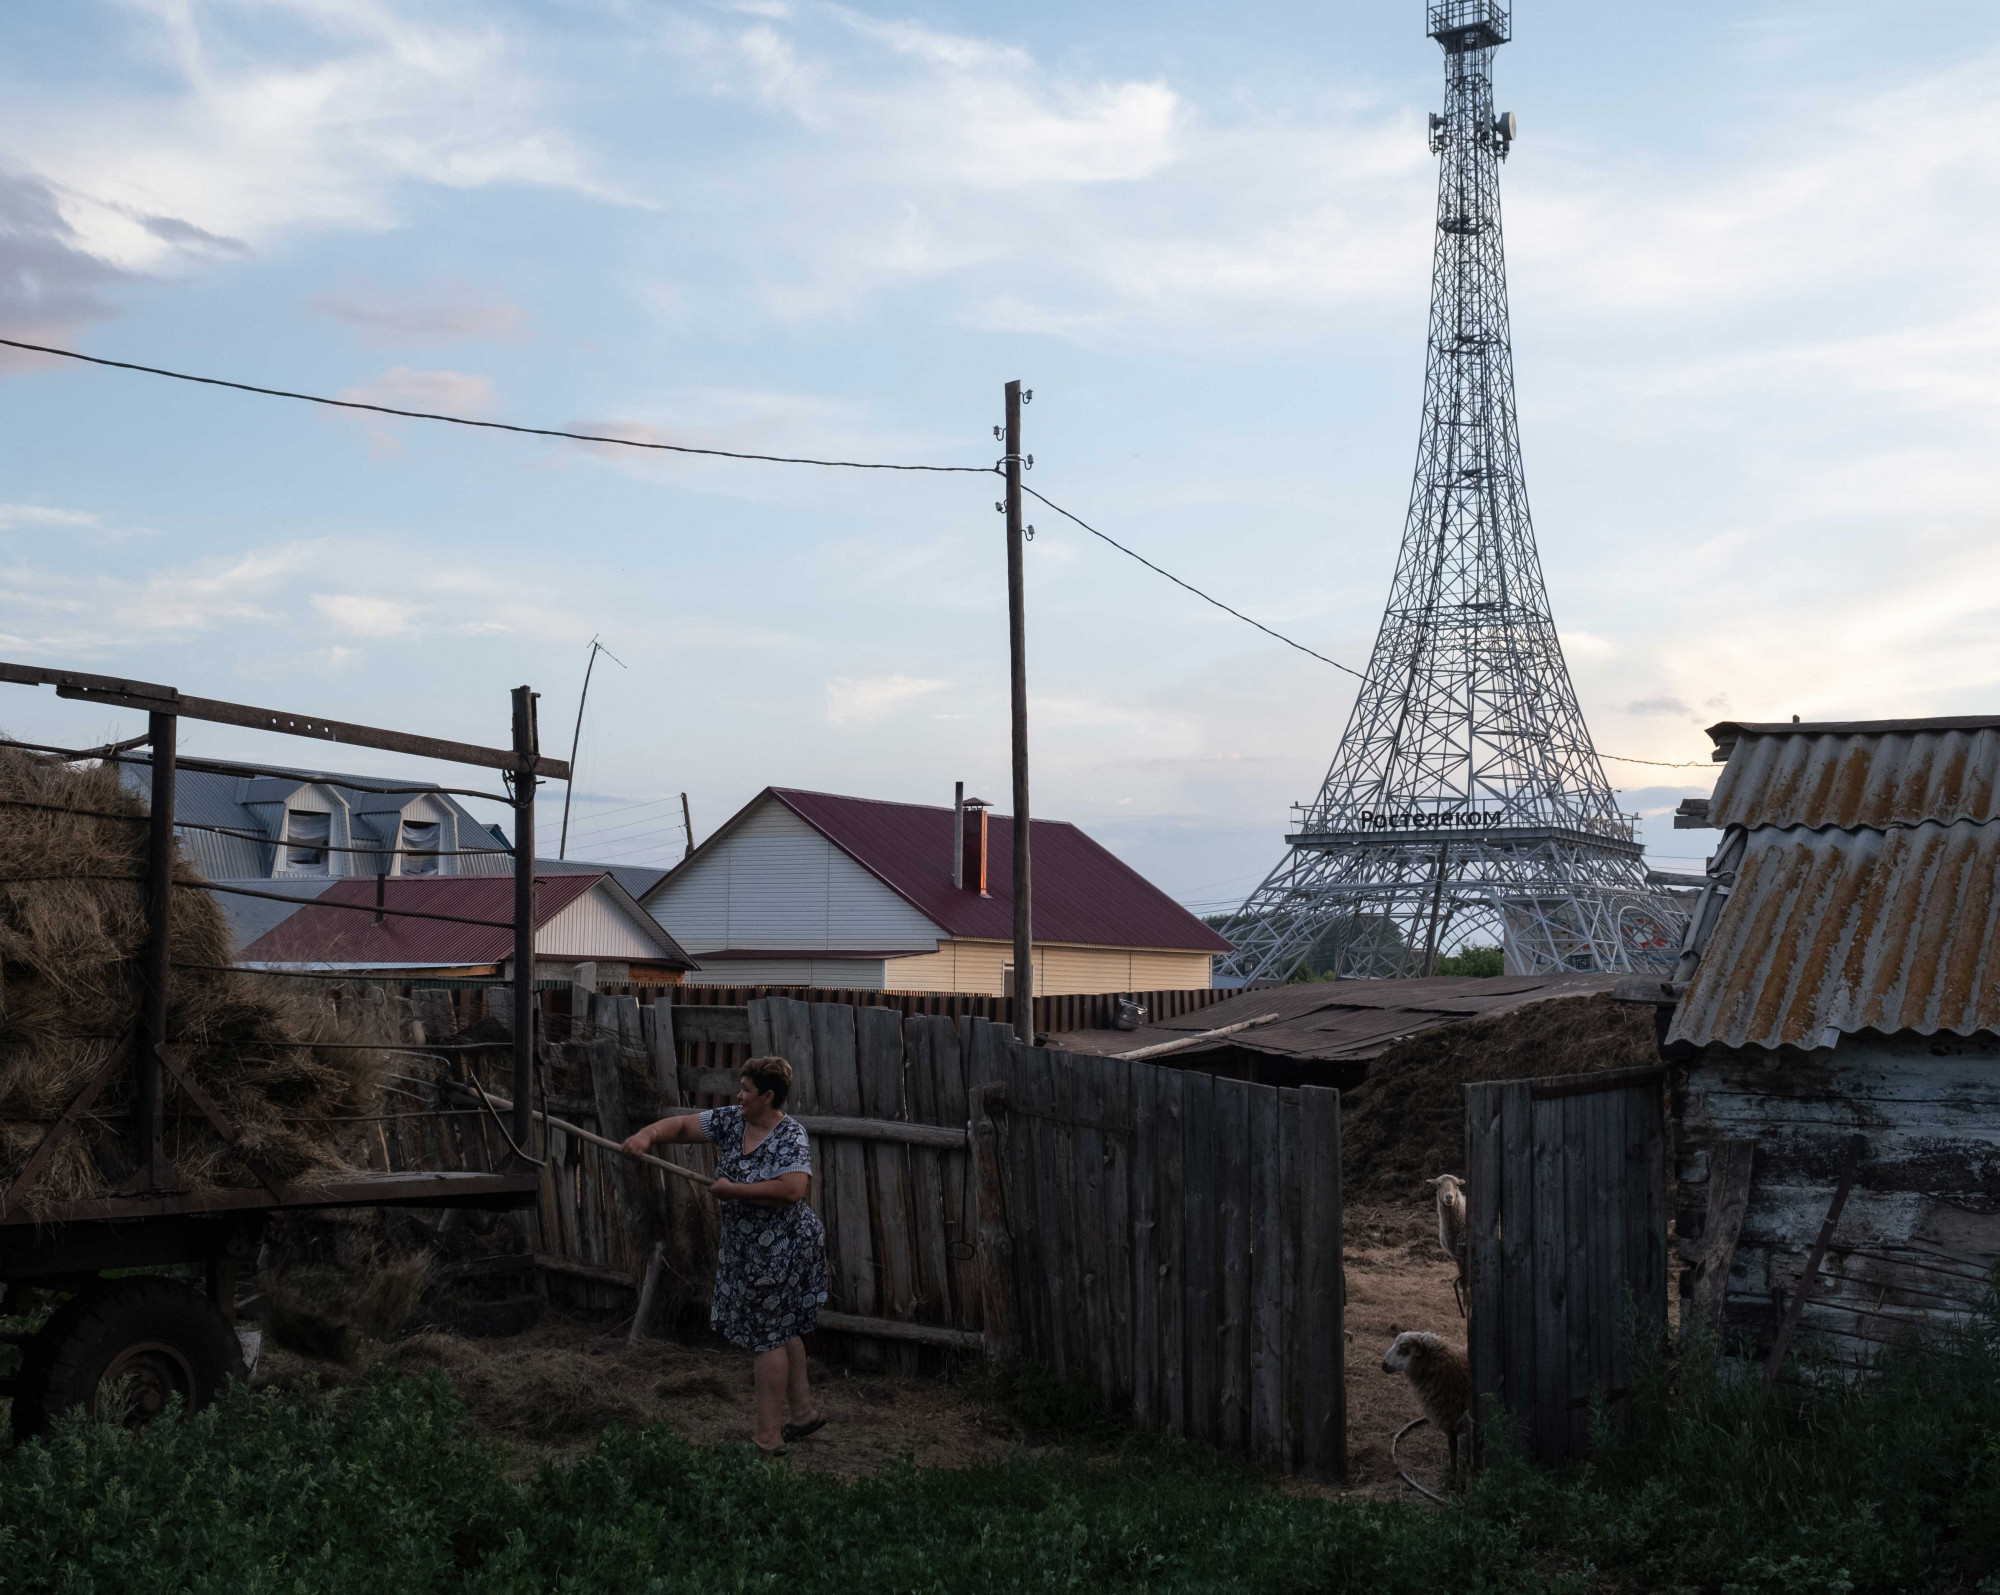 Bonjour, Parizh: I visited the Russian village with its very own Eiffel Tower